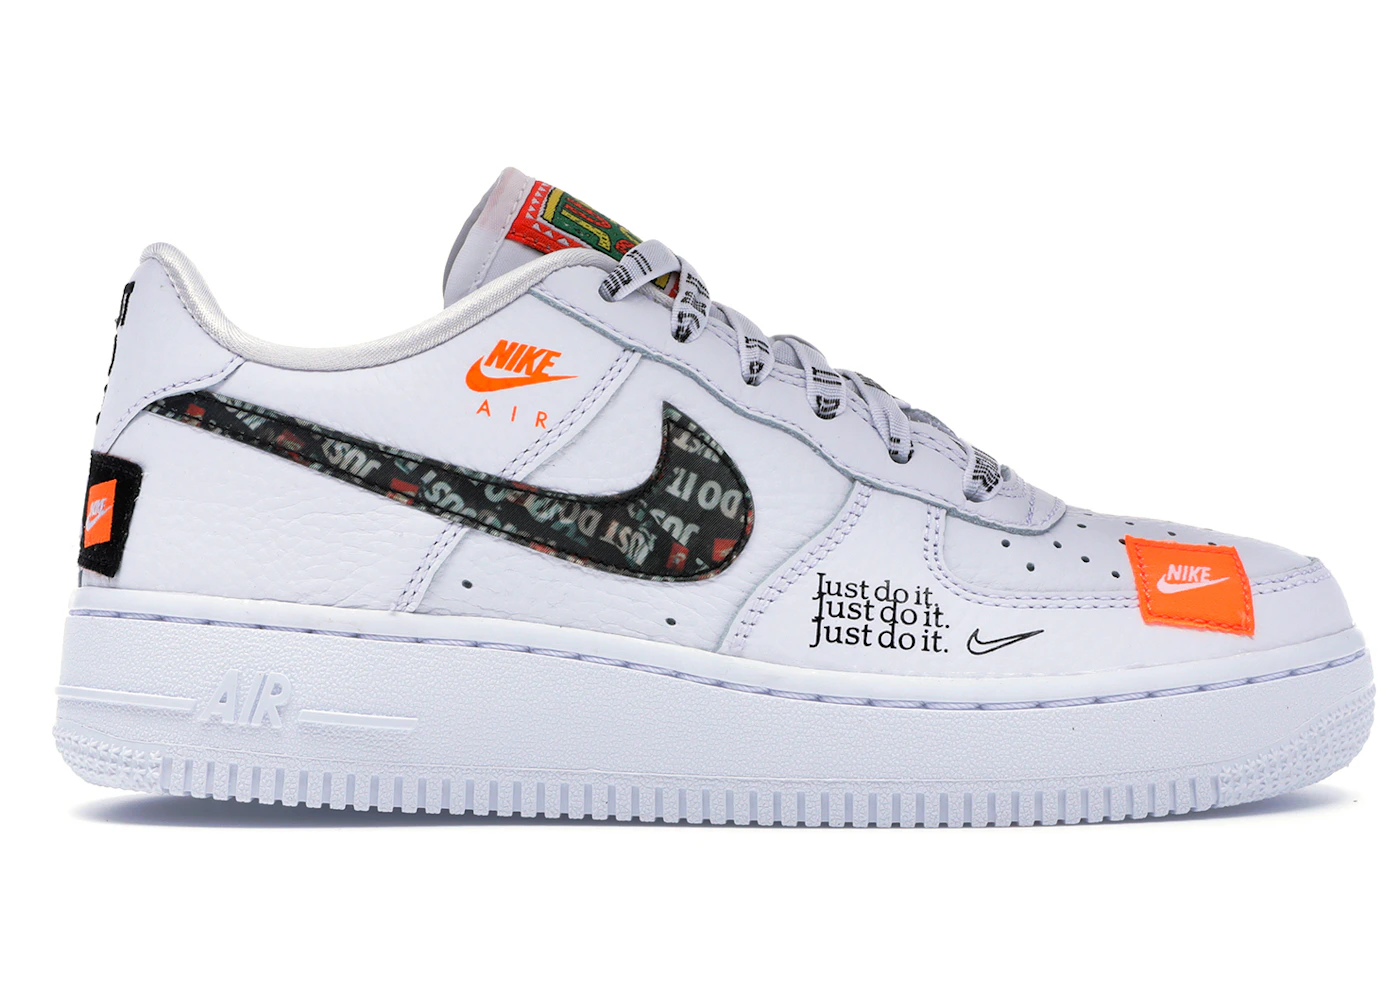 Limpia el cuarto Mayordomo atractivo Nike Air Force 1 Low Just Do It Pack White (GS) Kids' - AO3977-100 - US